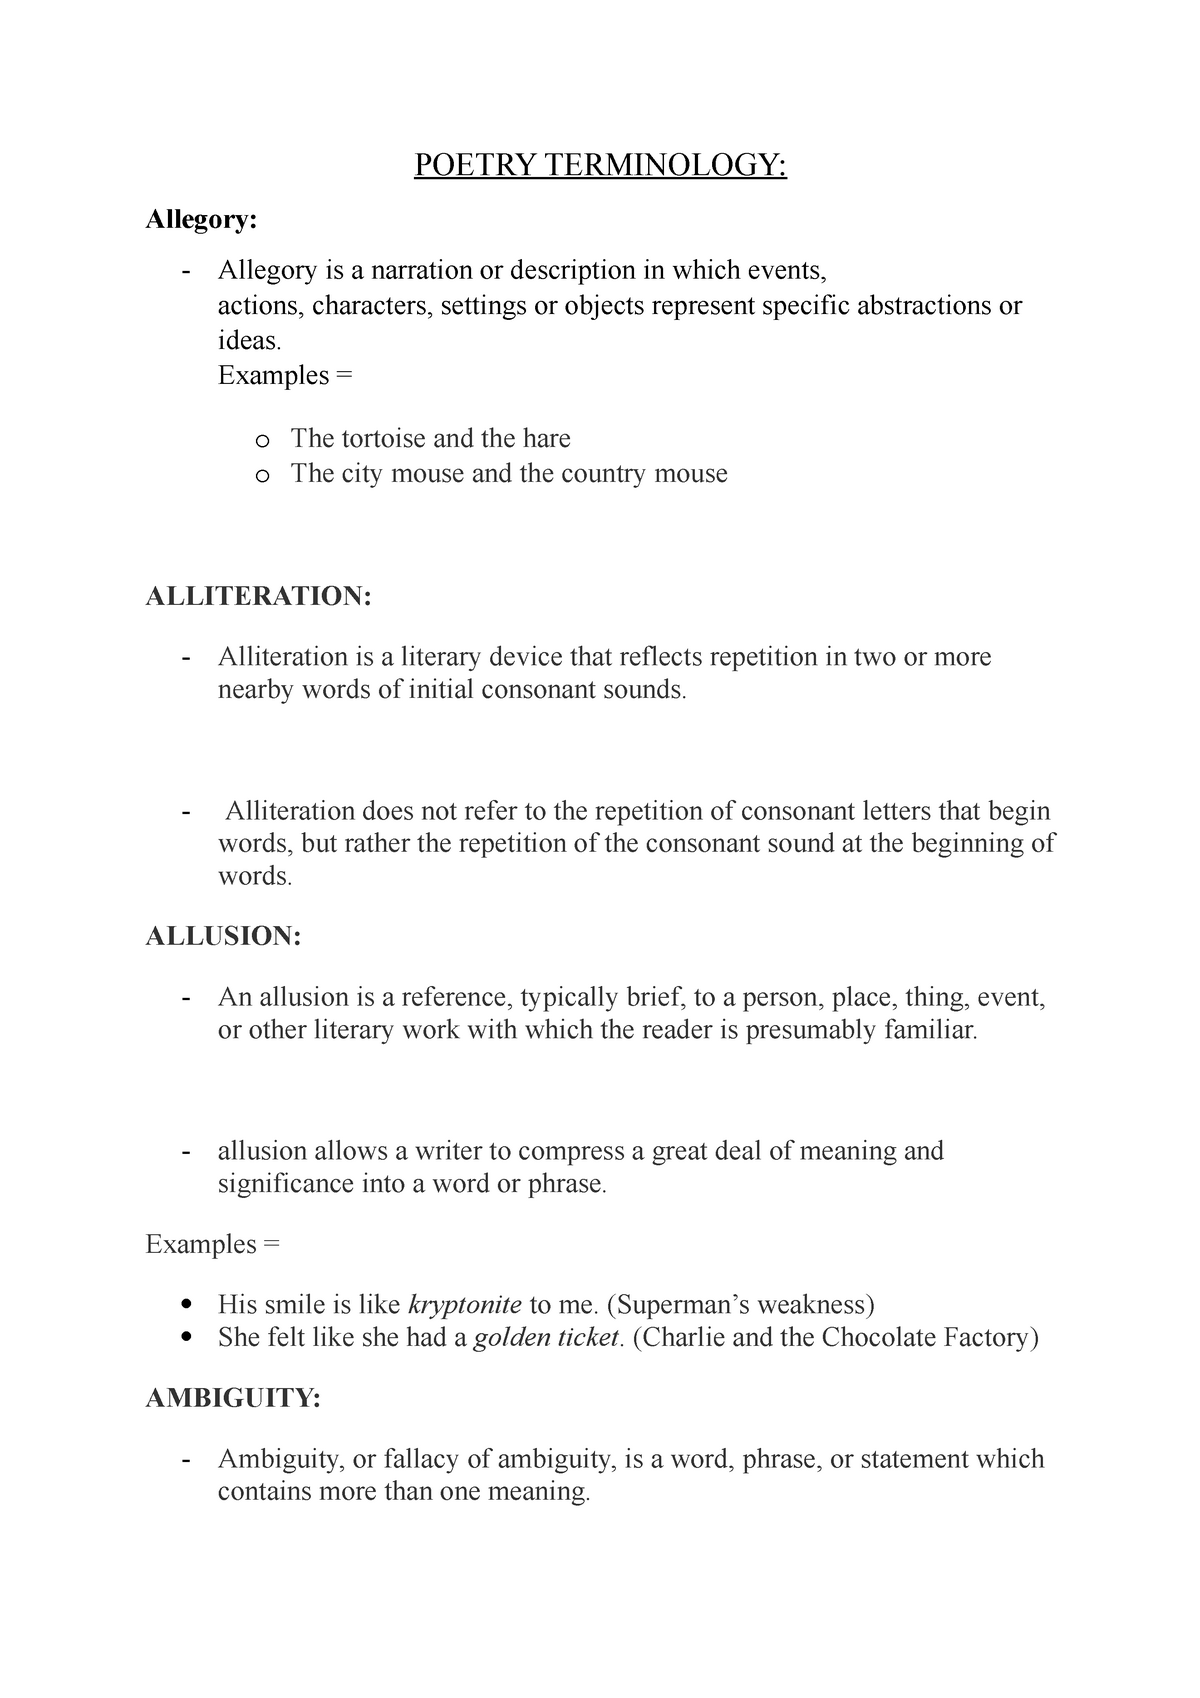 Poetry Terminology list for ENG 120 2021 - POETRY TERMINOLOGY: Allegory ...